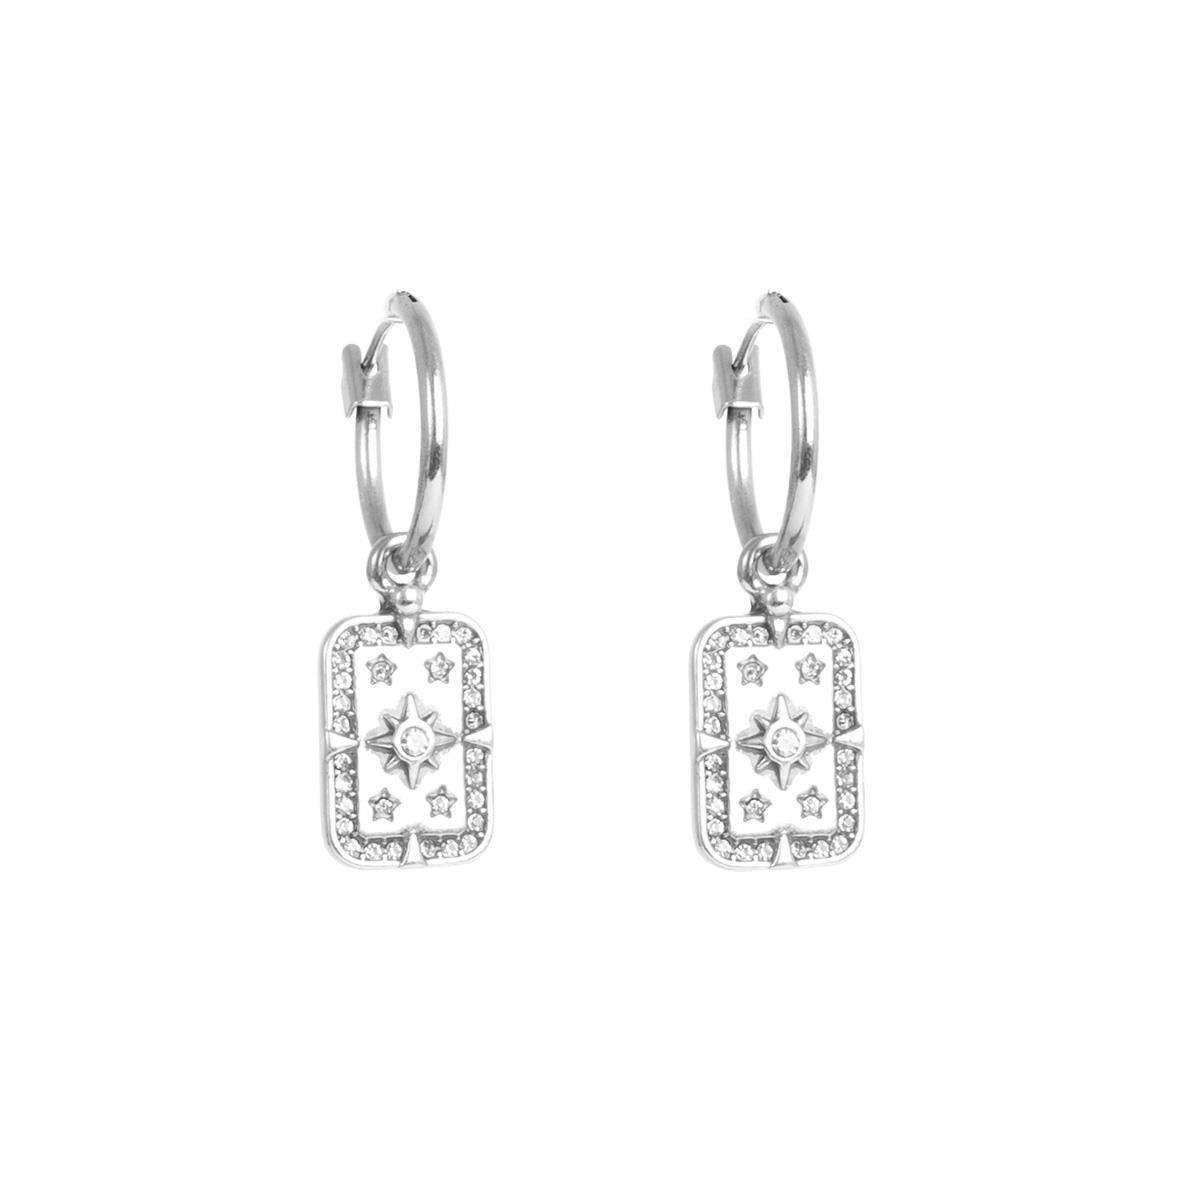 Medium Earrings With Charm Astro Silver